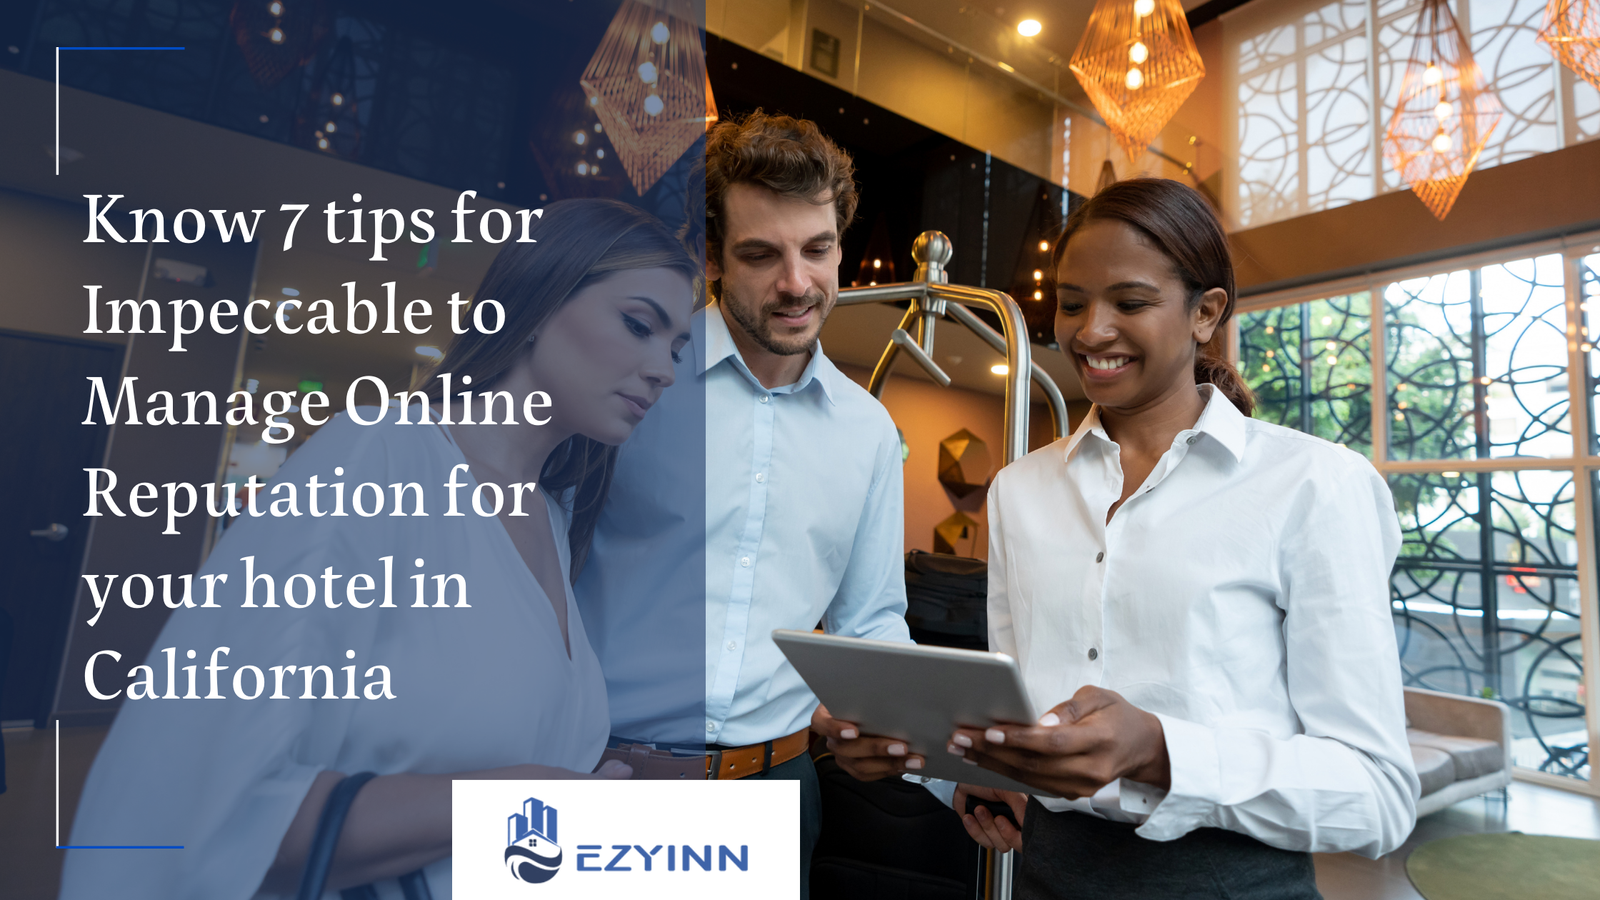 Know 7 tips for Impeccable to Manage Online Reputation for your hotel in California | Ezyinn PMS